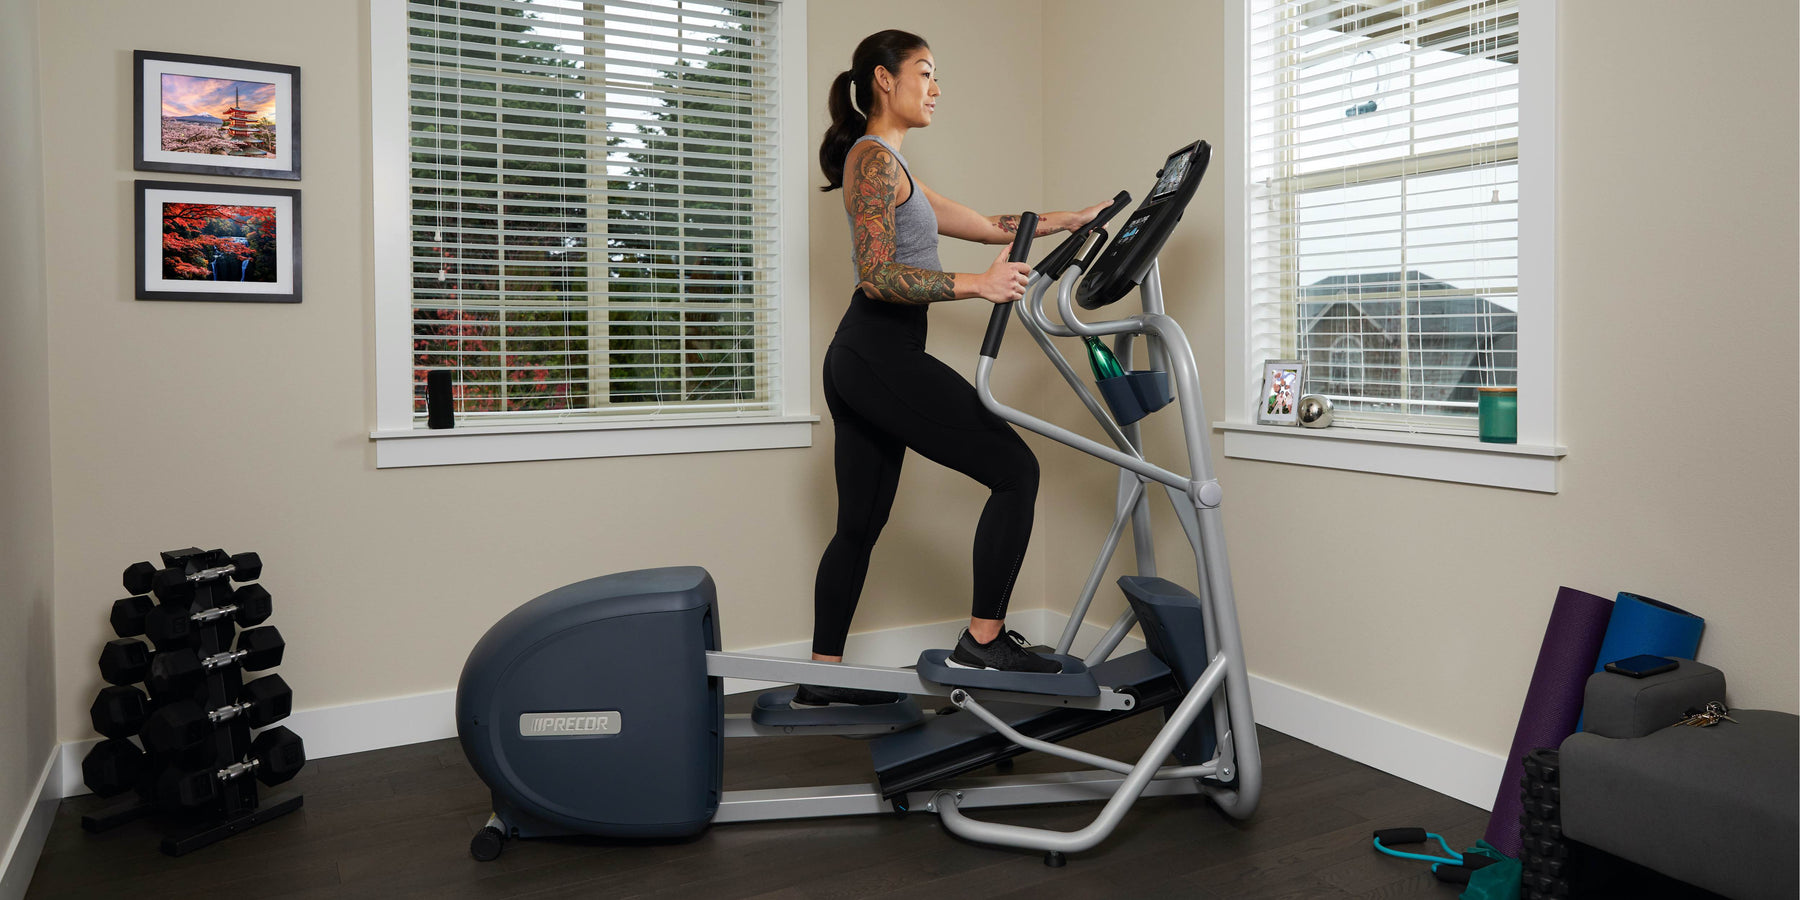 female exerciser cardio workout with Precor EFX 200 line elliptical at home